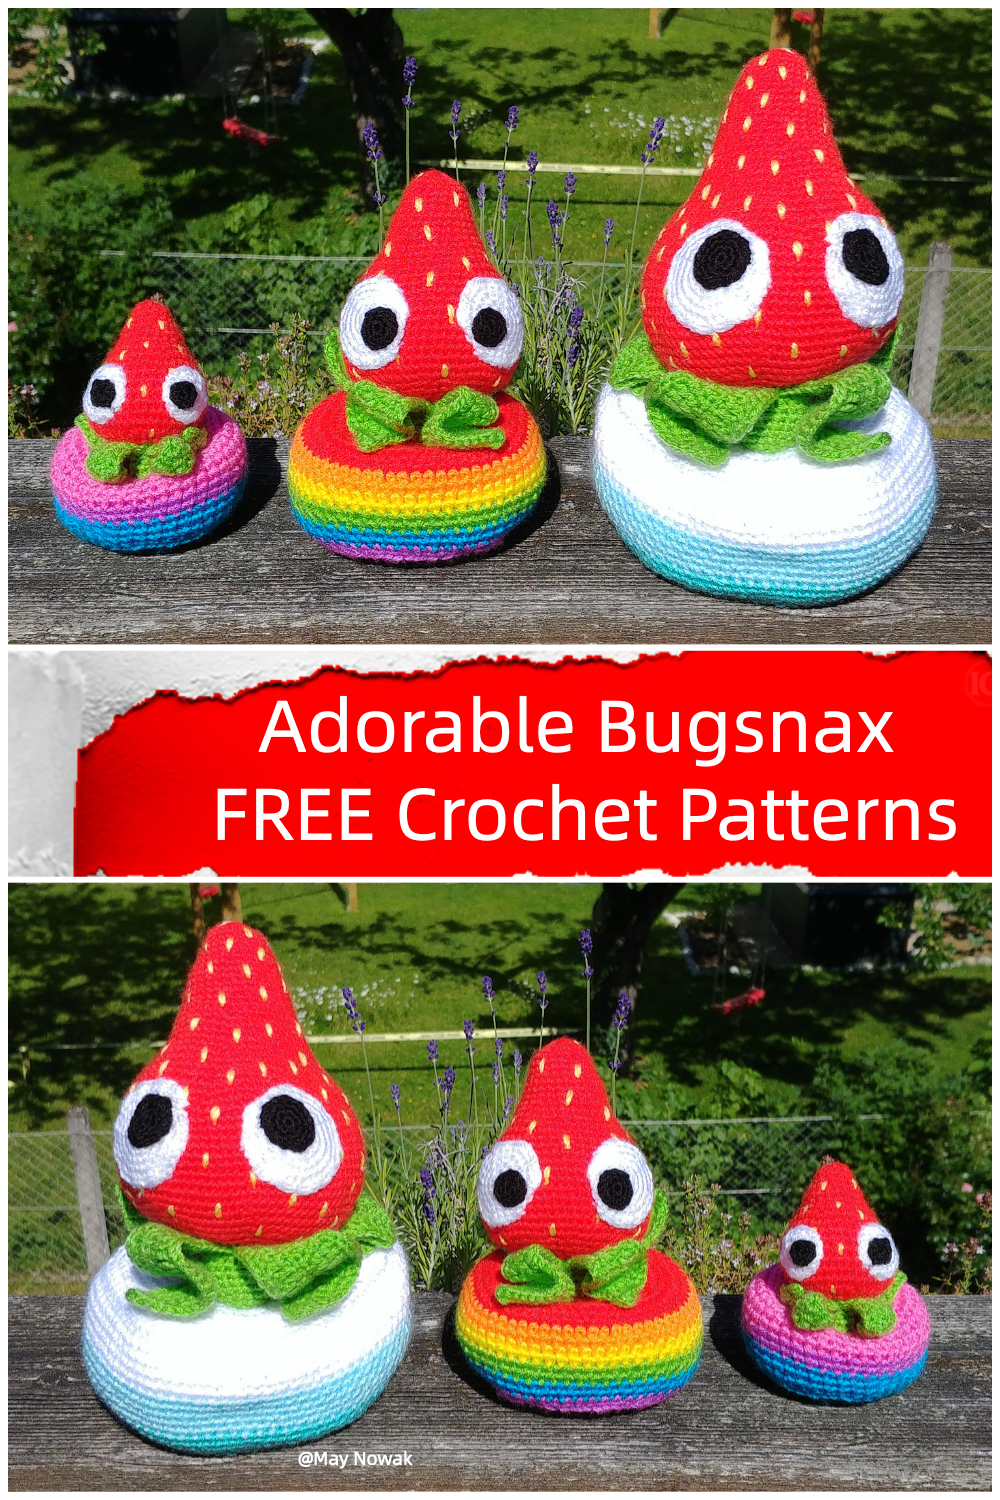 Adorable Bugsnax FREE Crochet Patterns